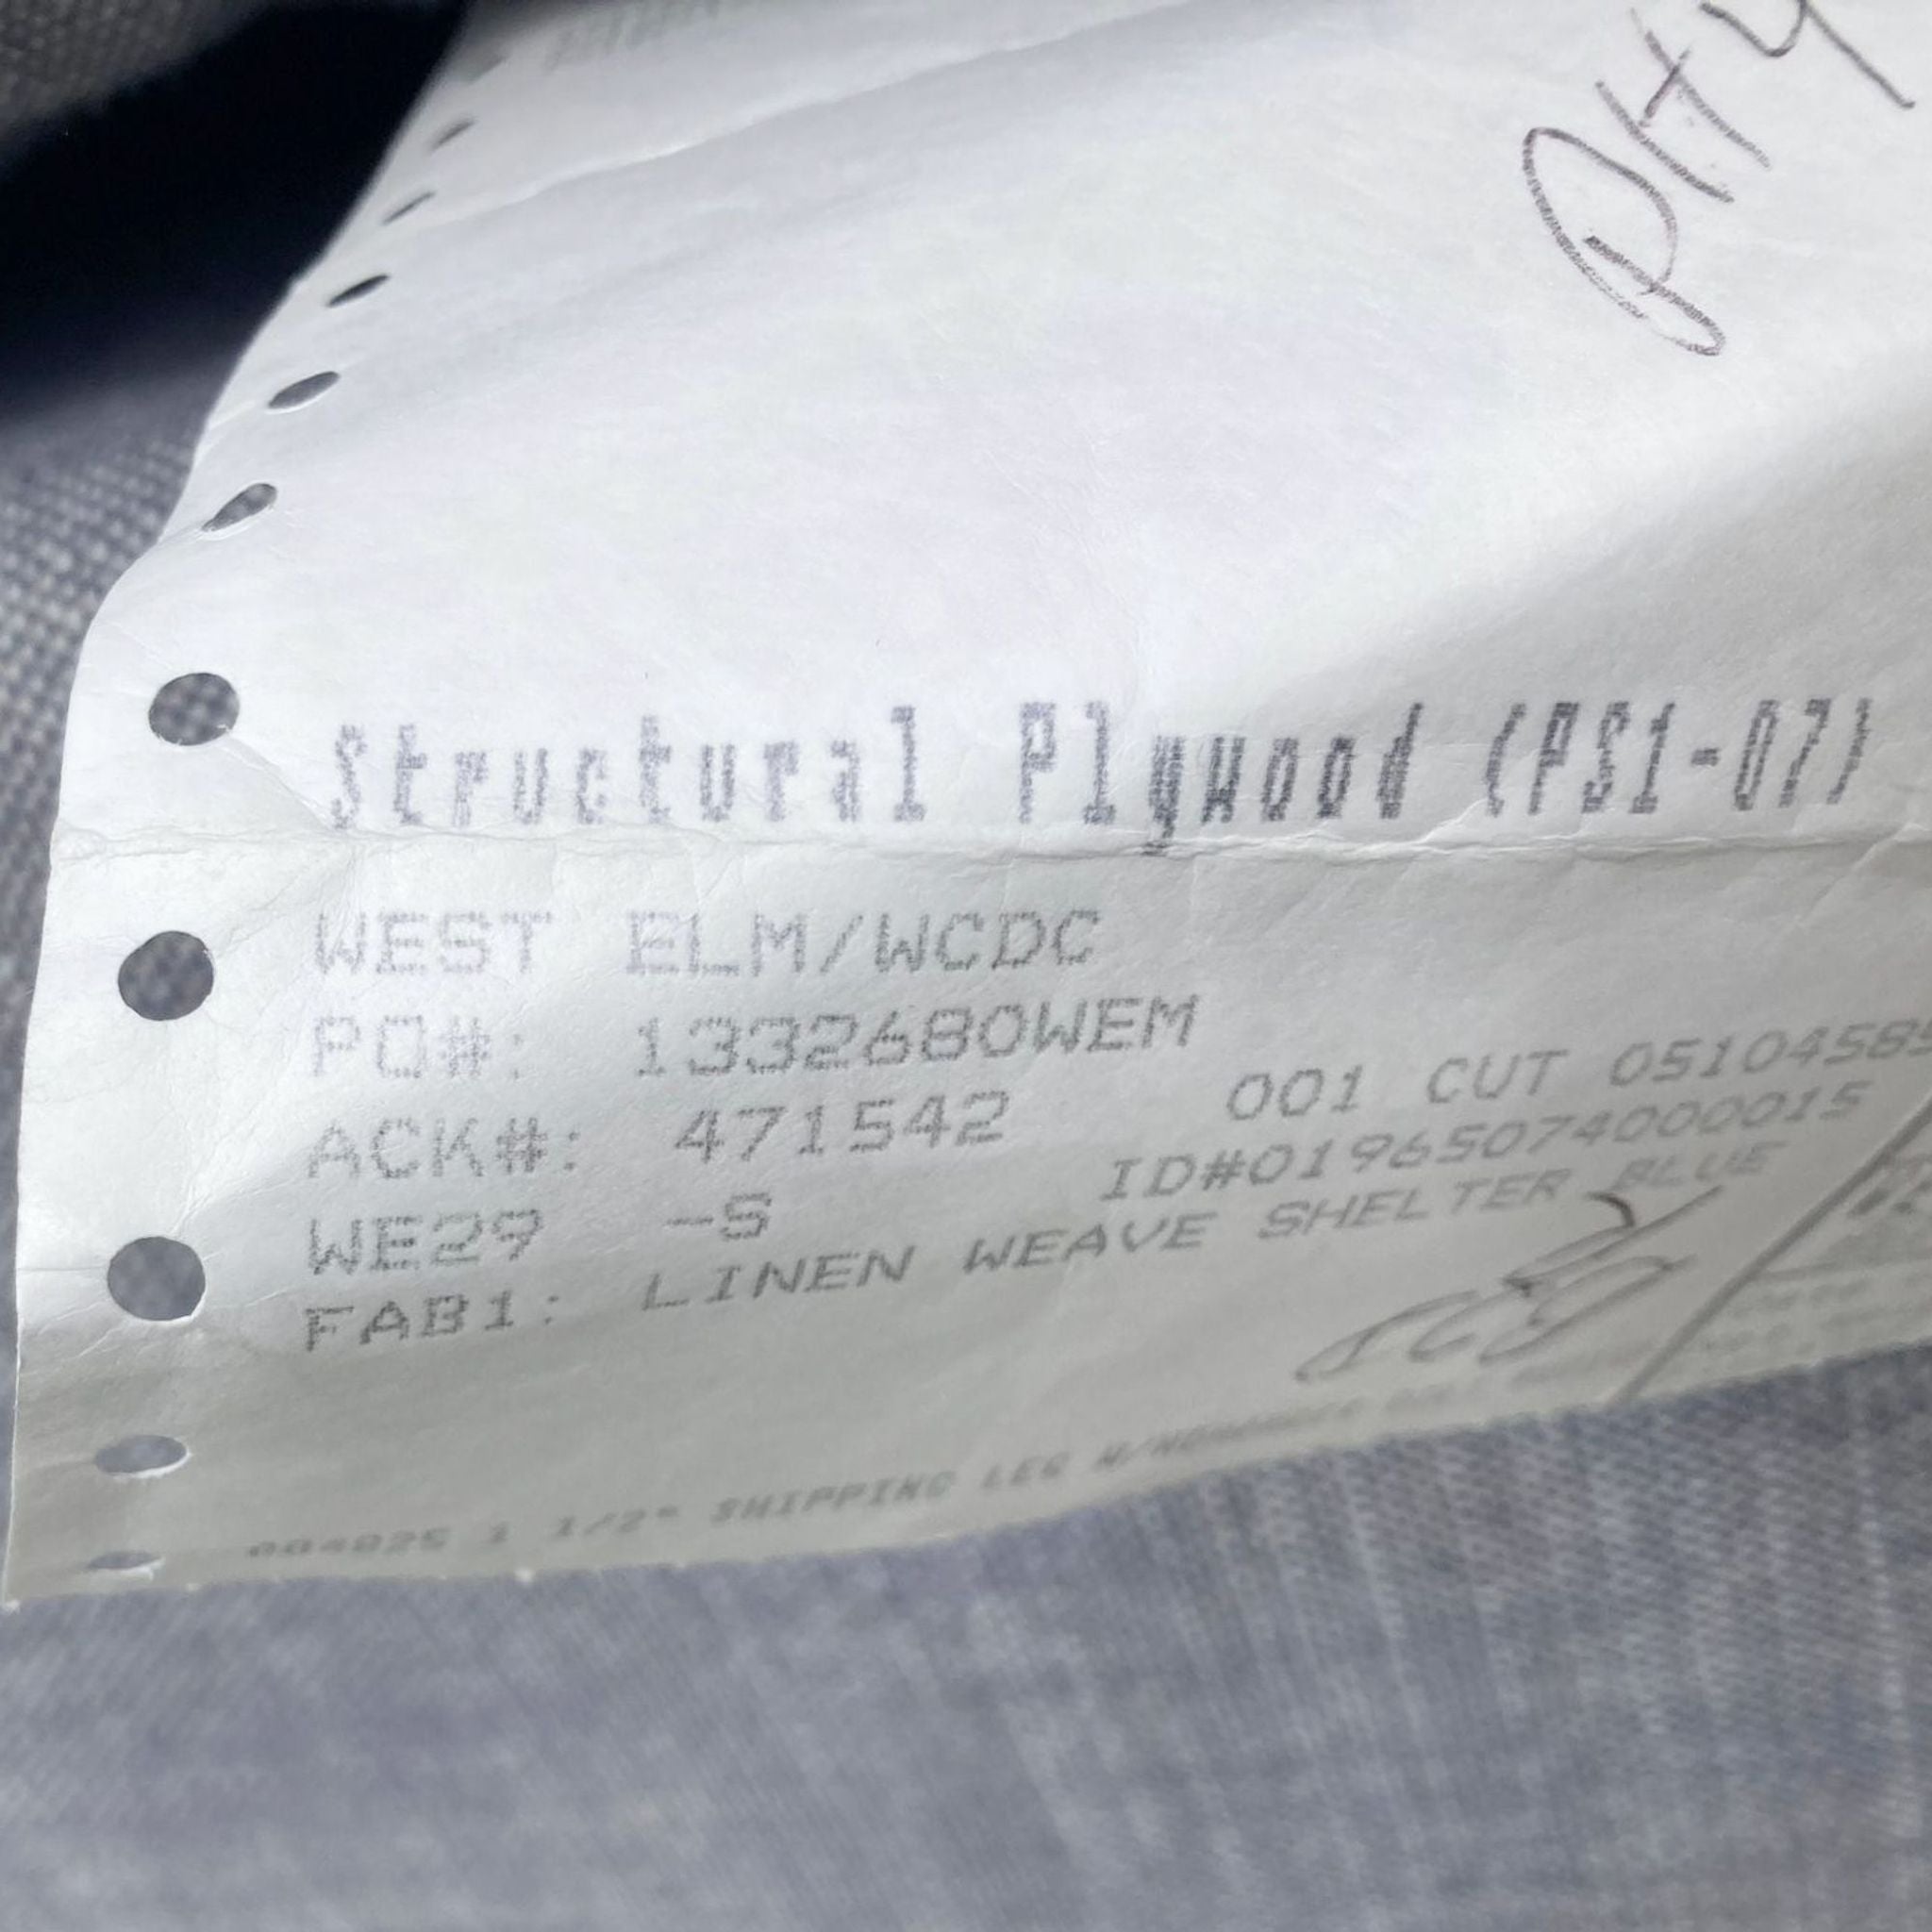 Detailed manufacturing label for a West Elm product, with specifications for a linen weave clean line bench seat sofa.